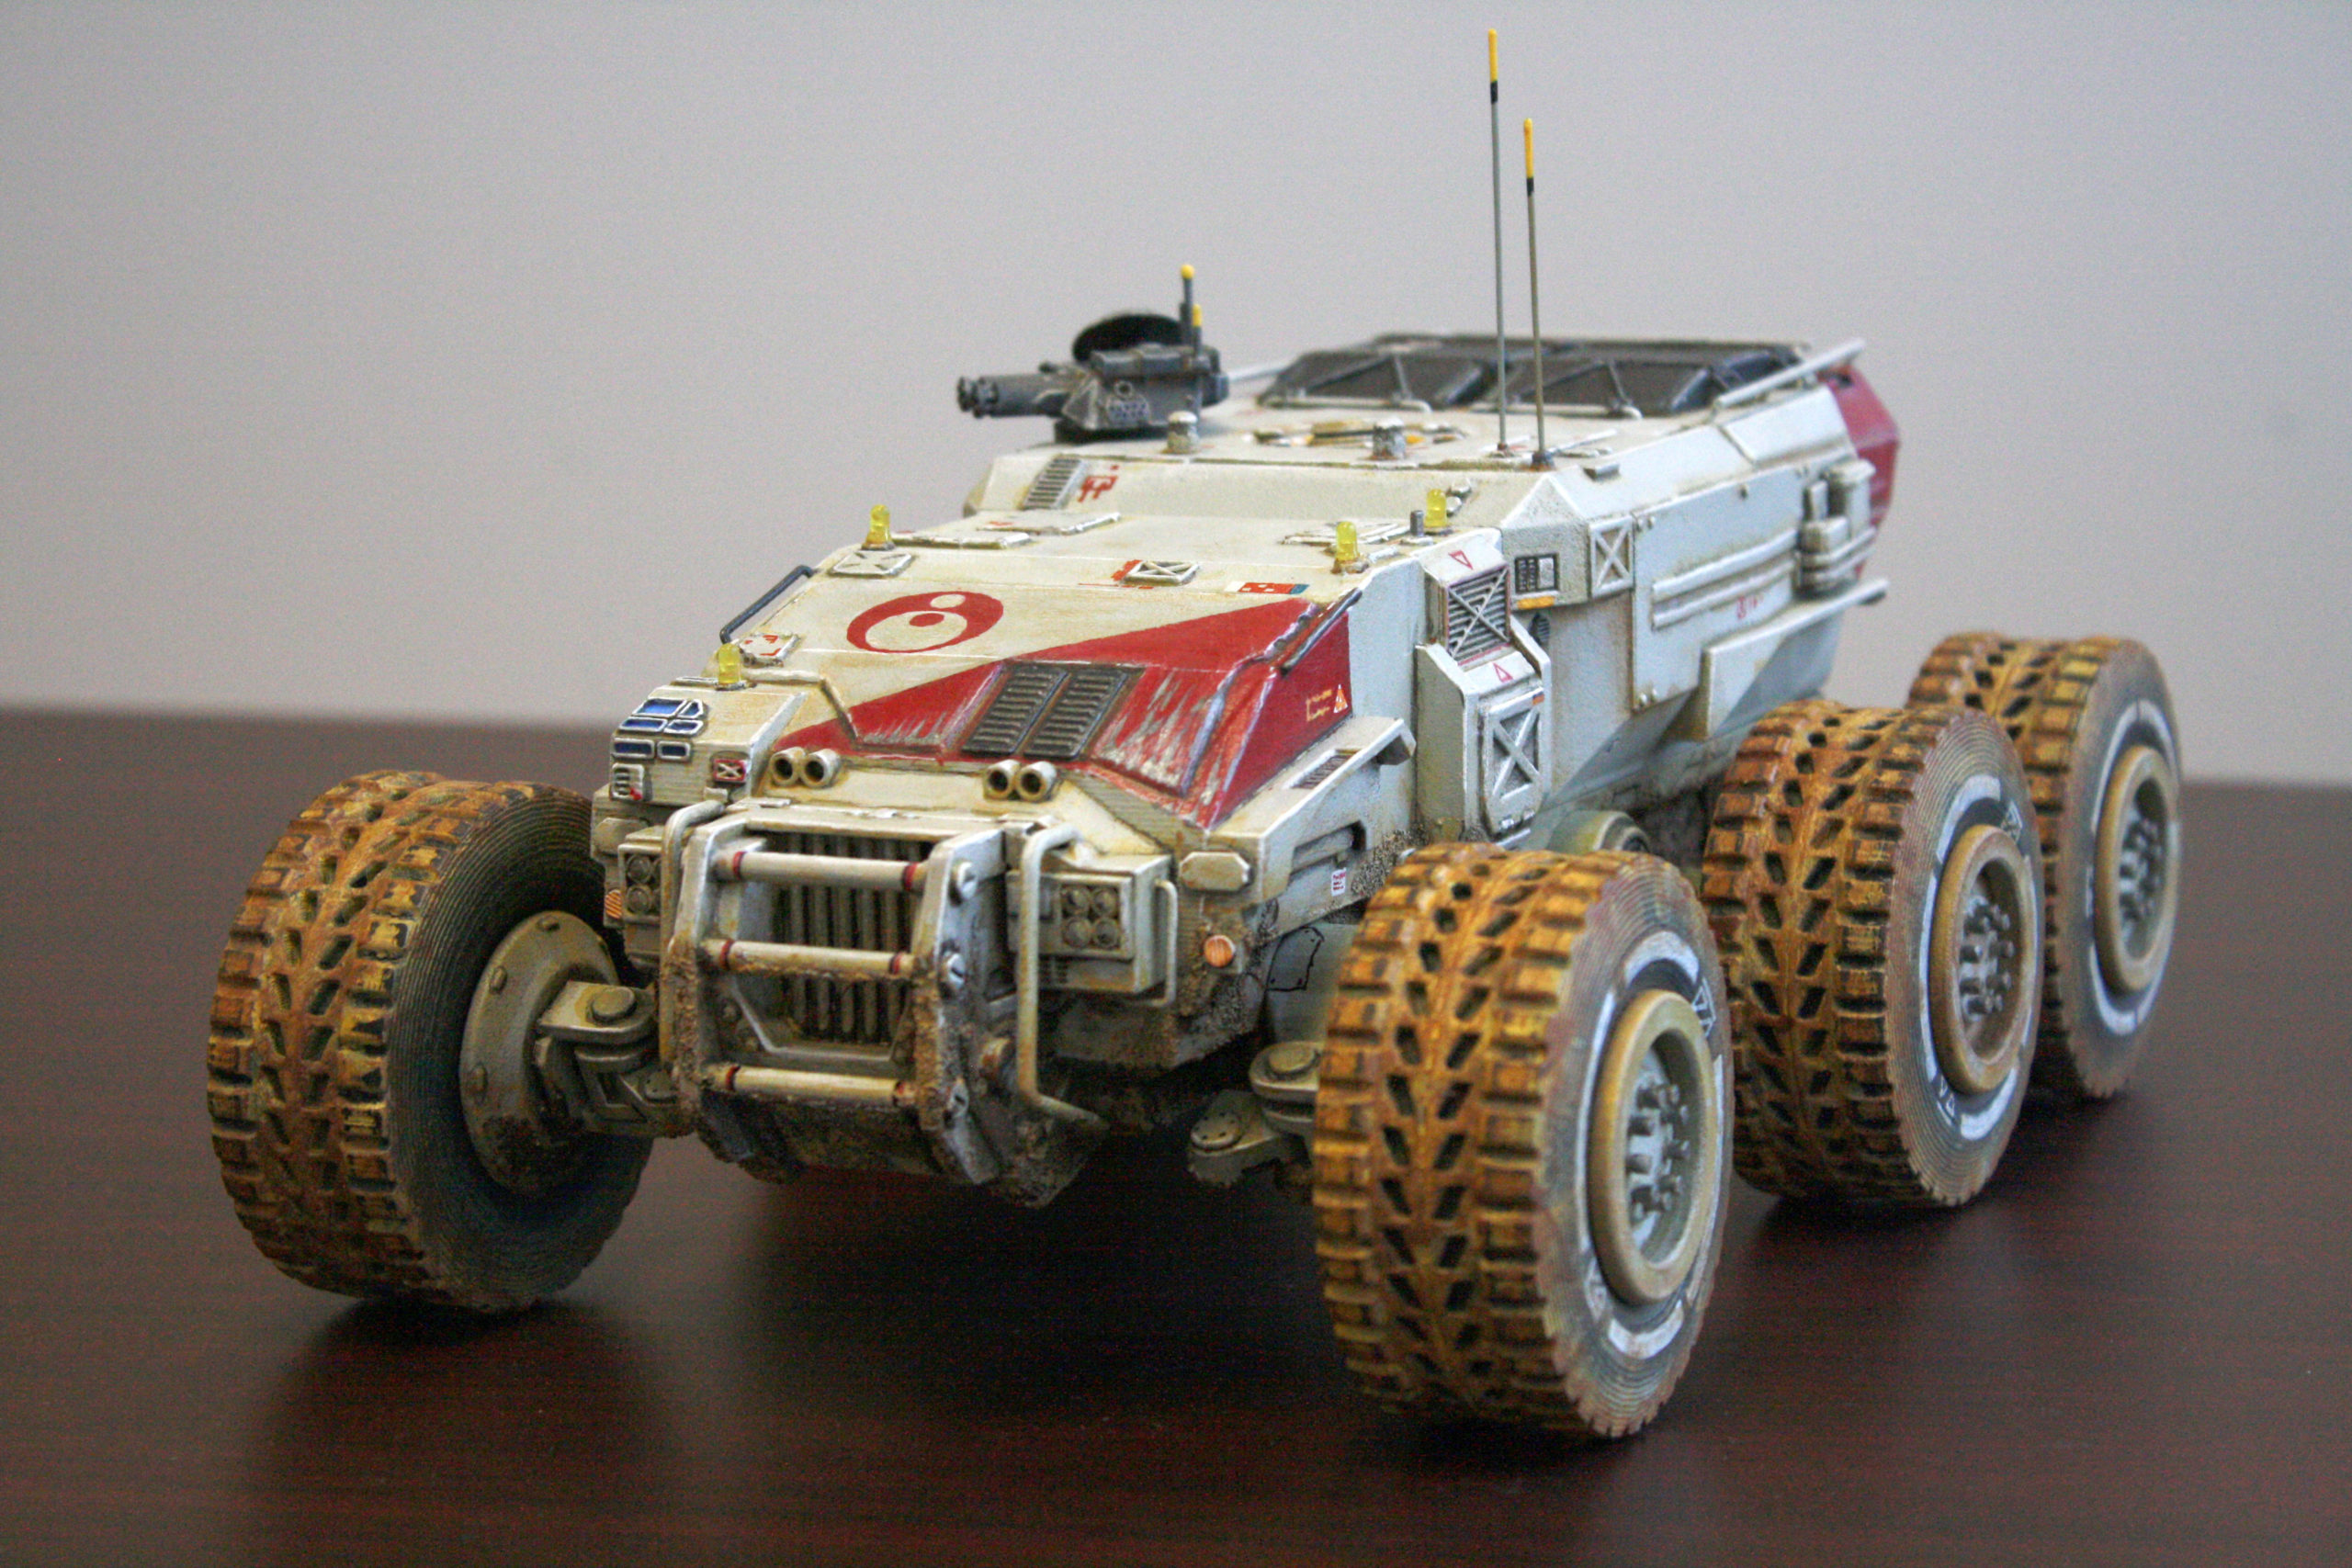 A Homeworld Buggy For The Home